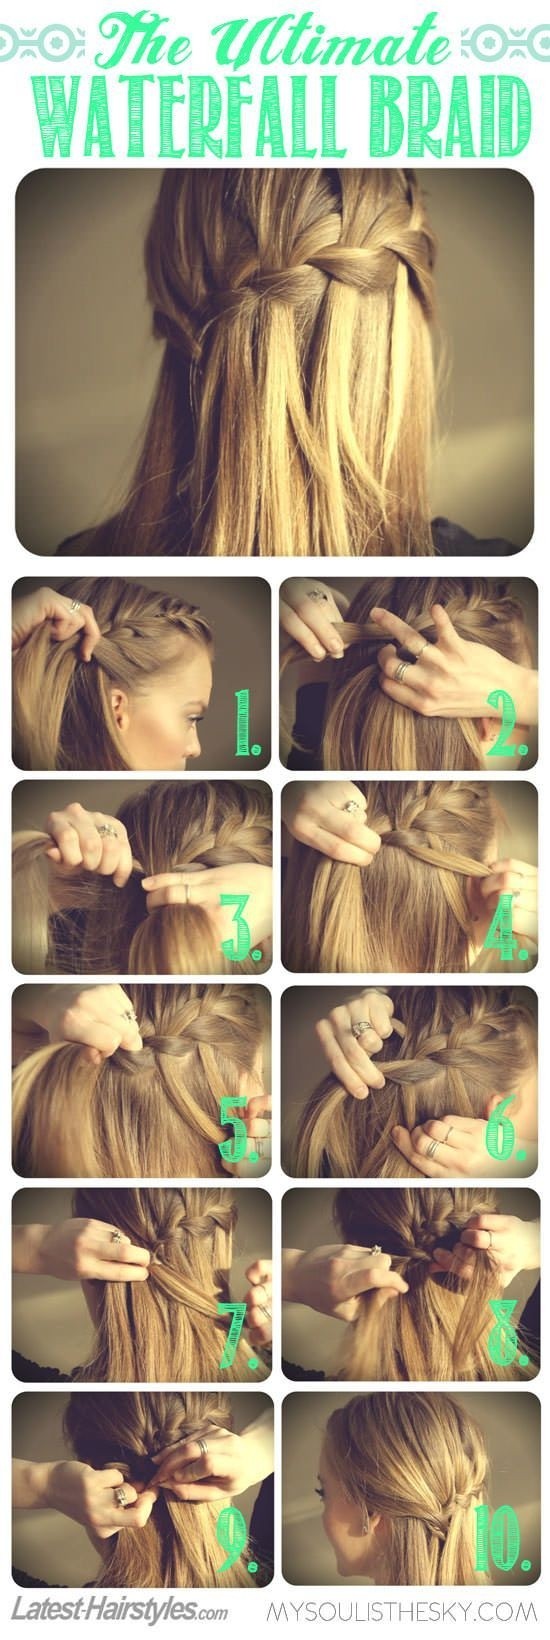 10 Best Waterfall Braids Hairstyle Ideas For Long Hair